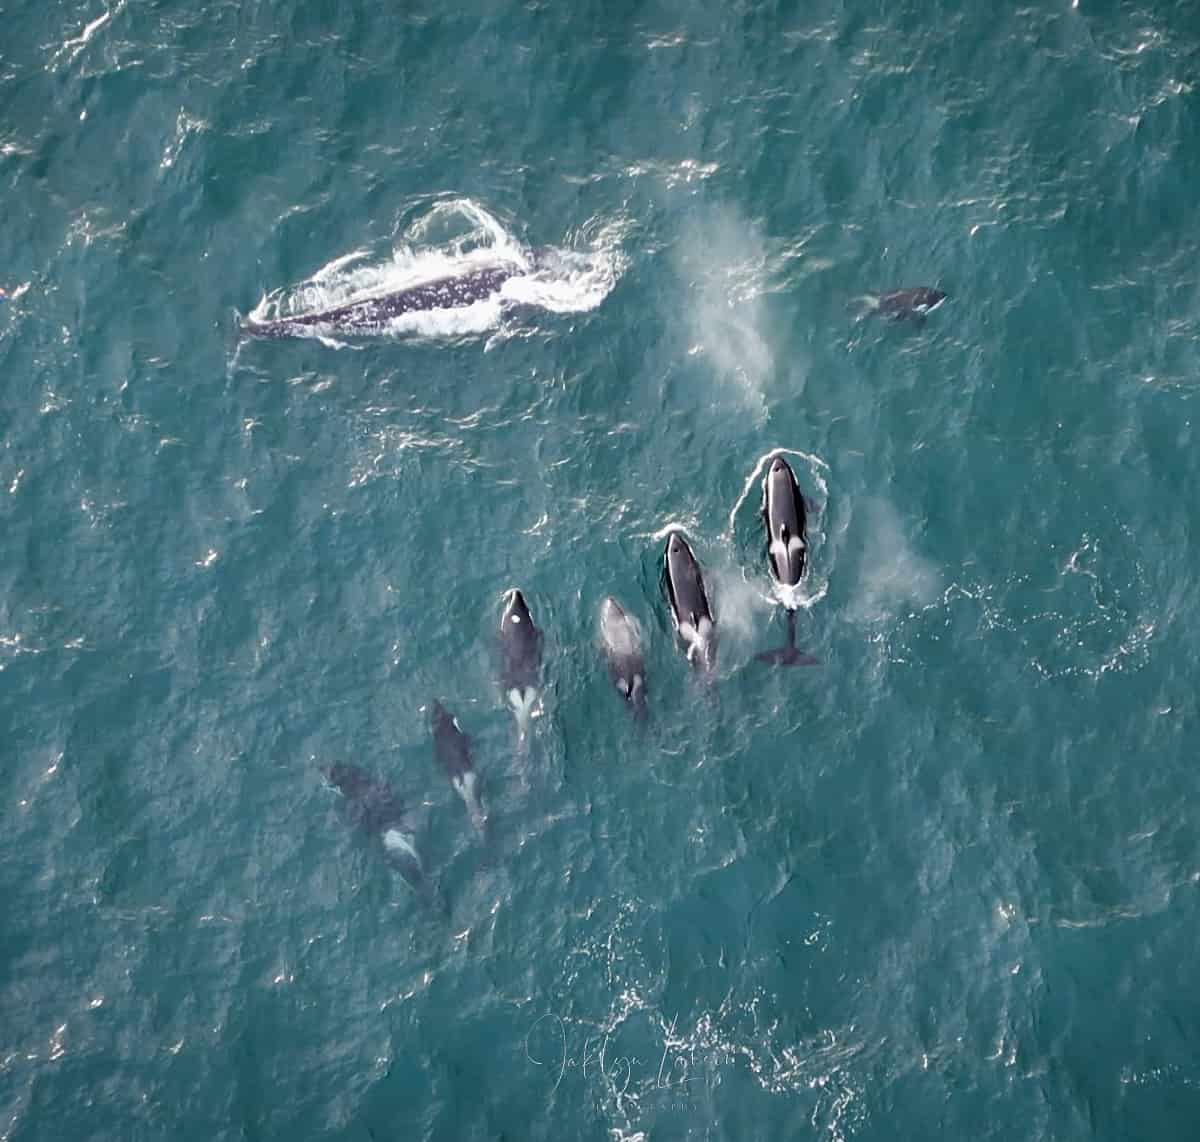 Spectacular Drone Footage Captures Orca Whales Hunting Gray Whale Calf in  Newport – Photographer Jaklyn Larsen's Unforeseen Encounter with Nature's  Majestic Display